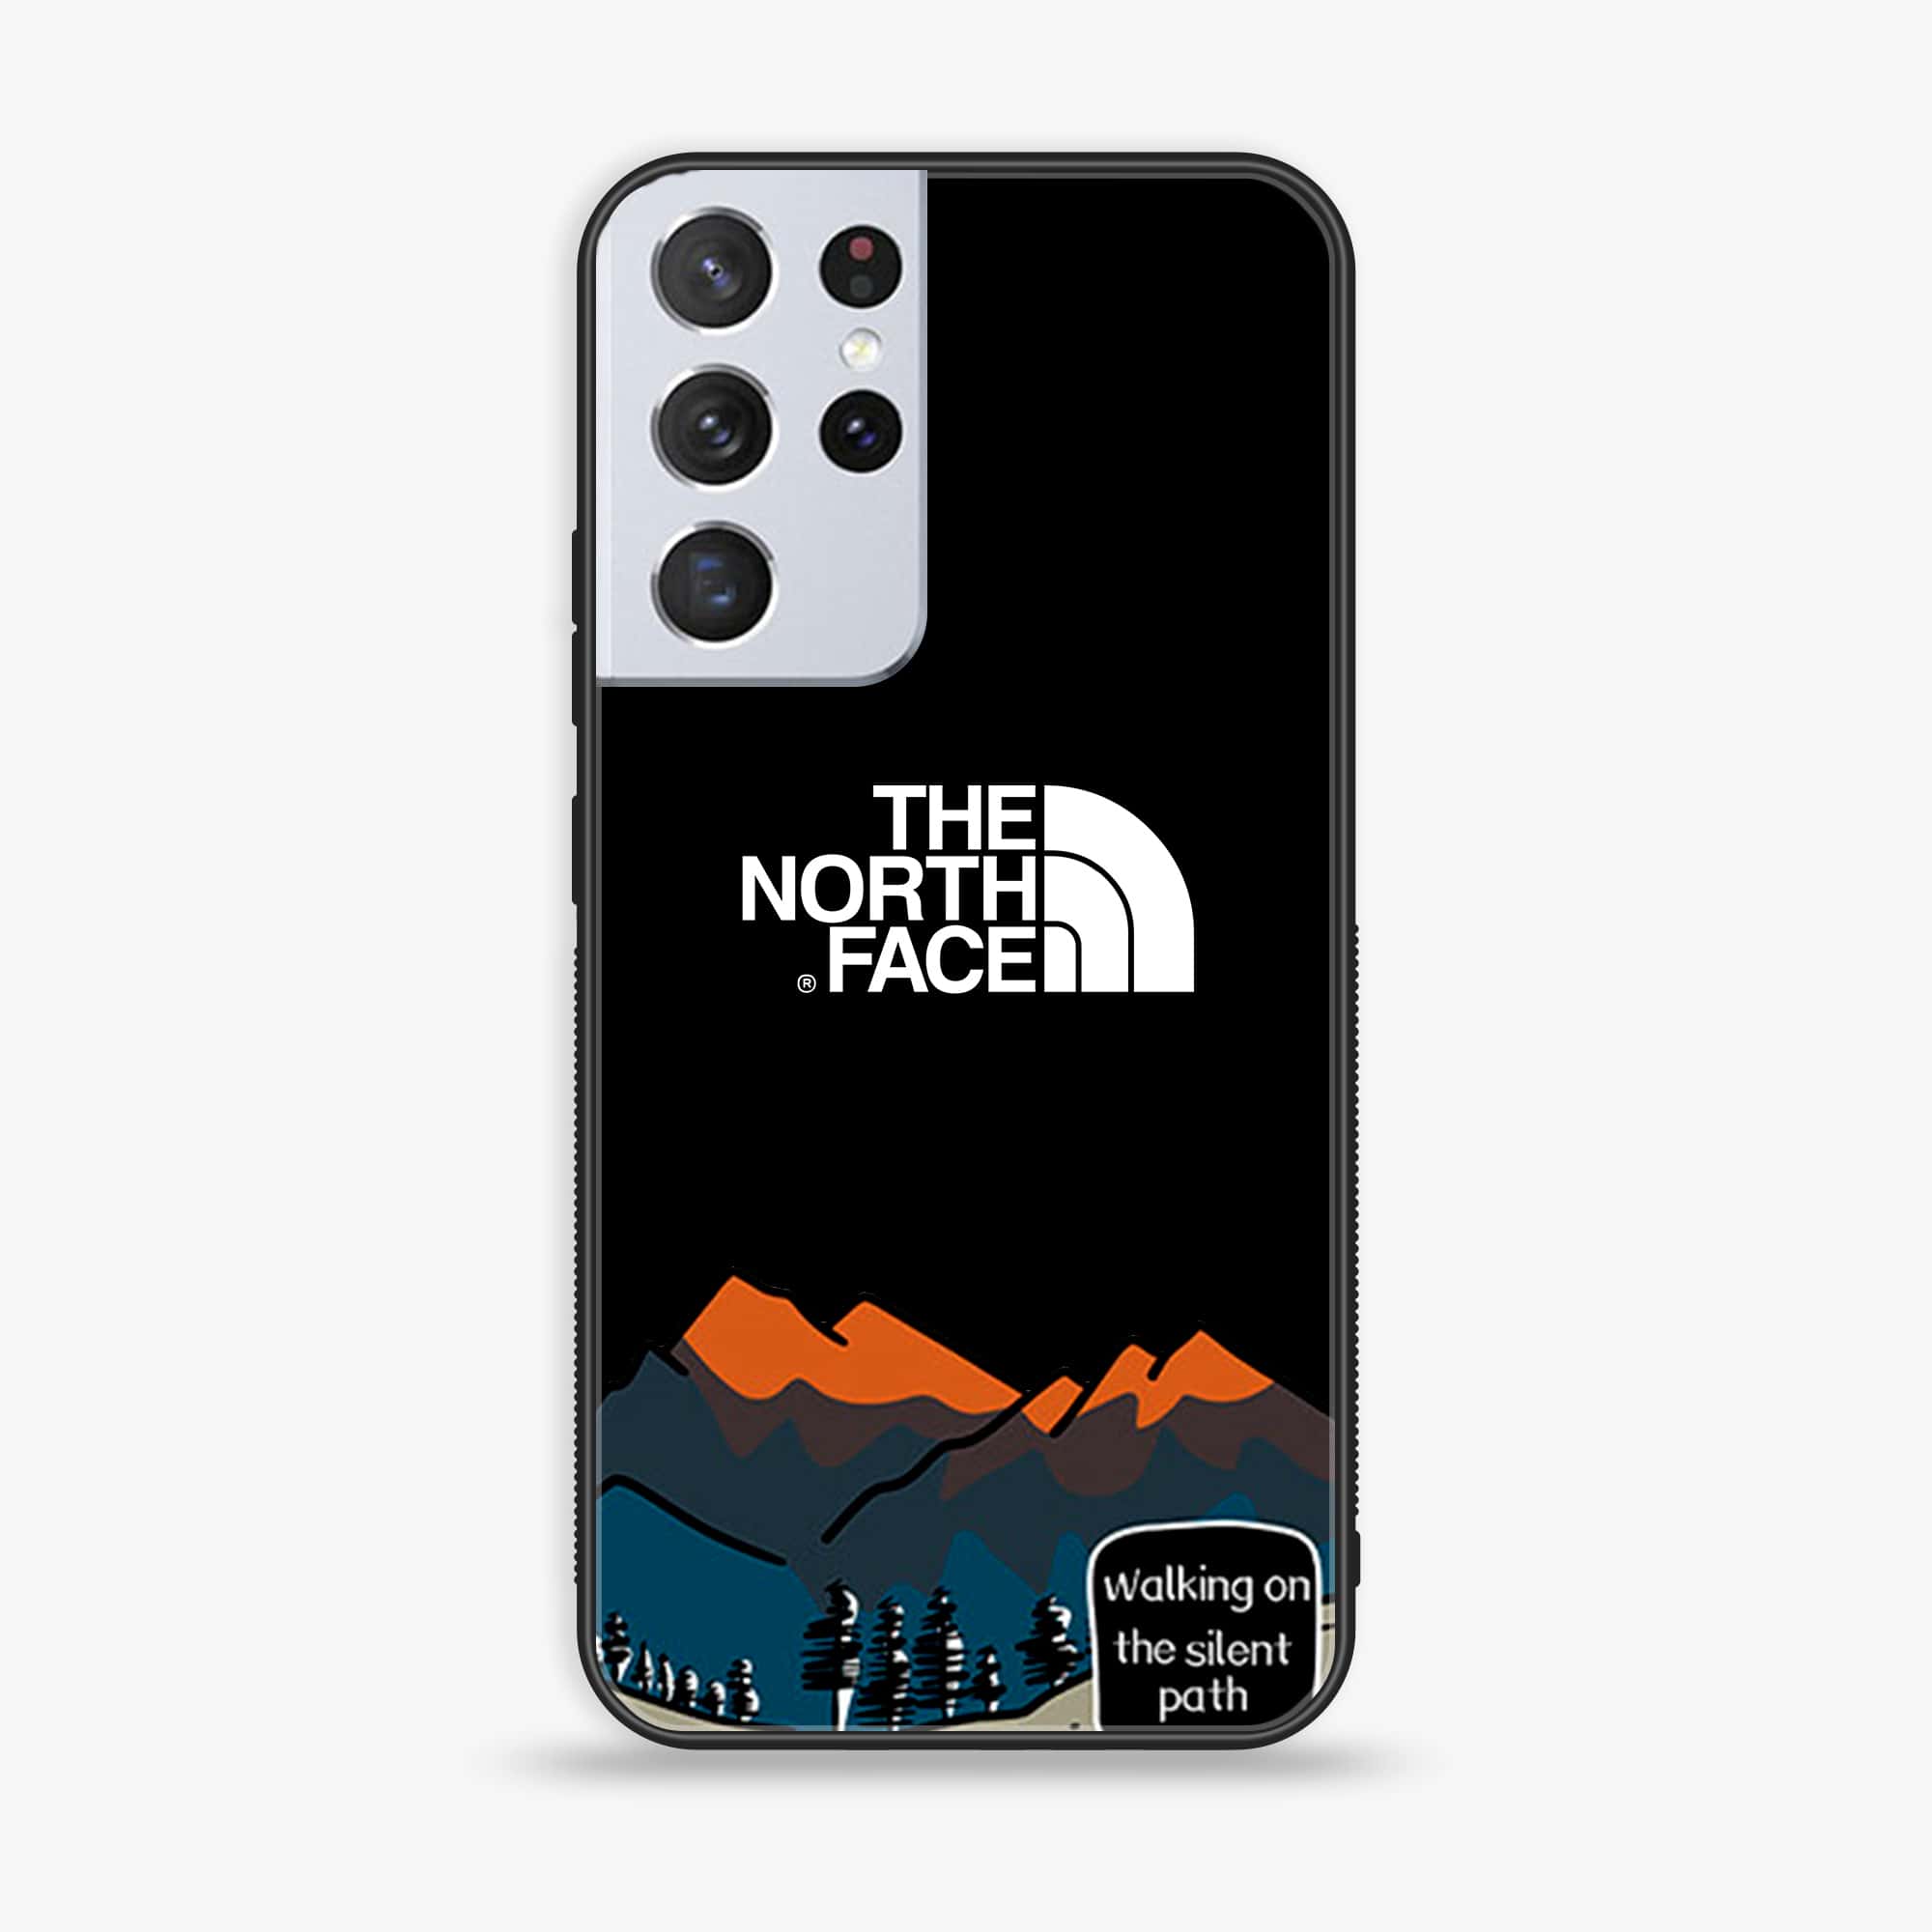 Galaxy S21 Ultra - The North Face Series - Premium Printed Glass soft Bumper shock Proof Case